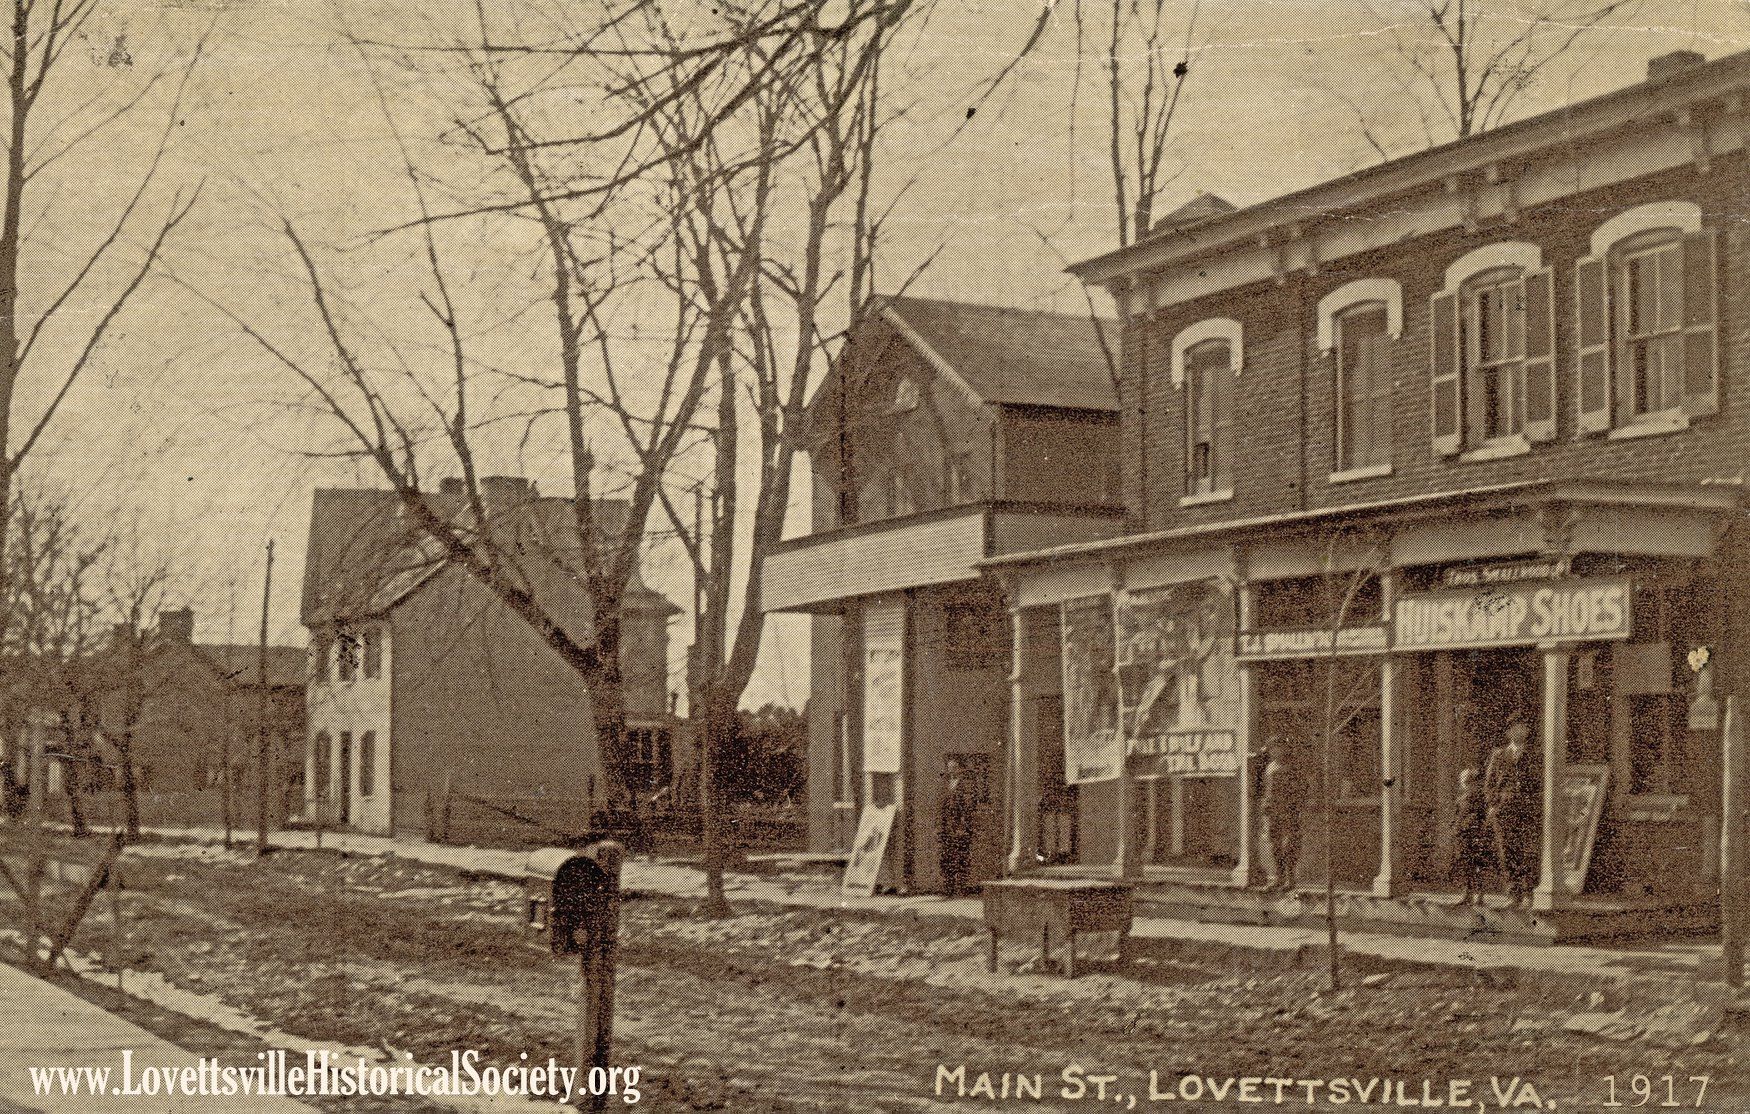 Thumbnail for the post titled: “’Over There’ Comes to Main Street: Loudoun and the First World War, 1917-18,” Next in the Lovettsville Historical Society Lecture Series (11/18/2018)